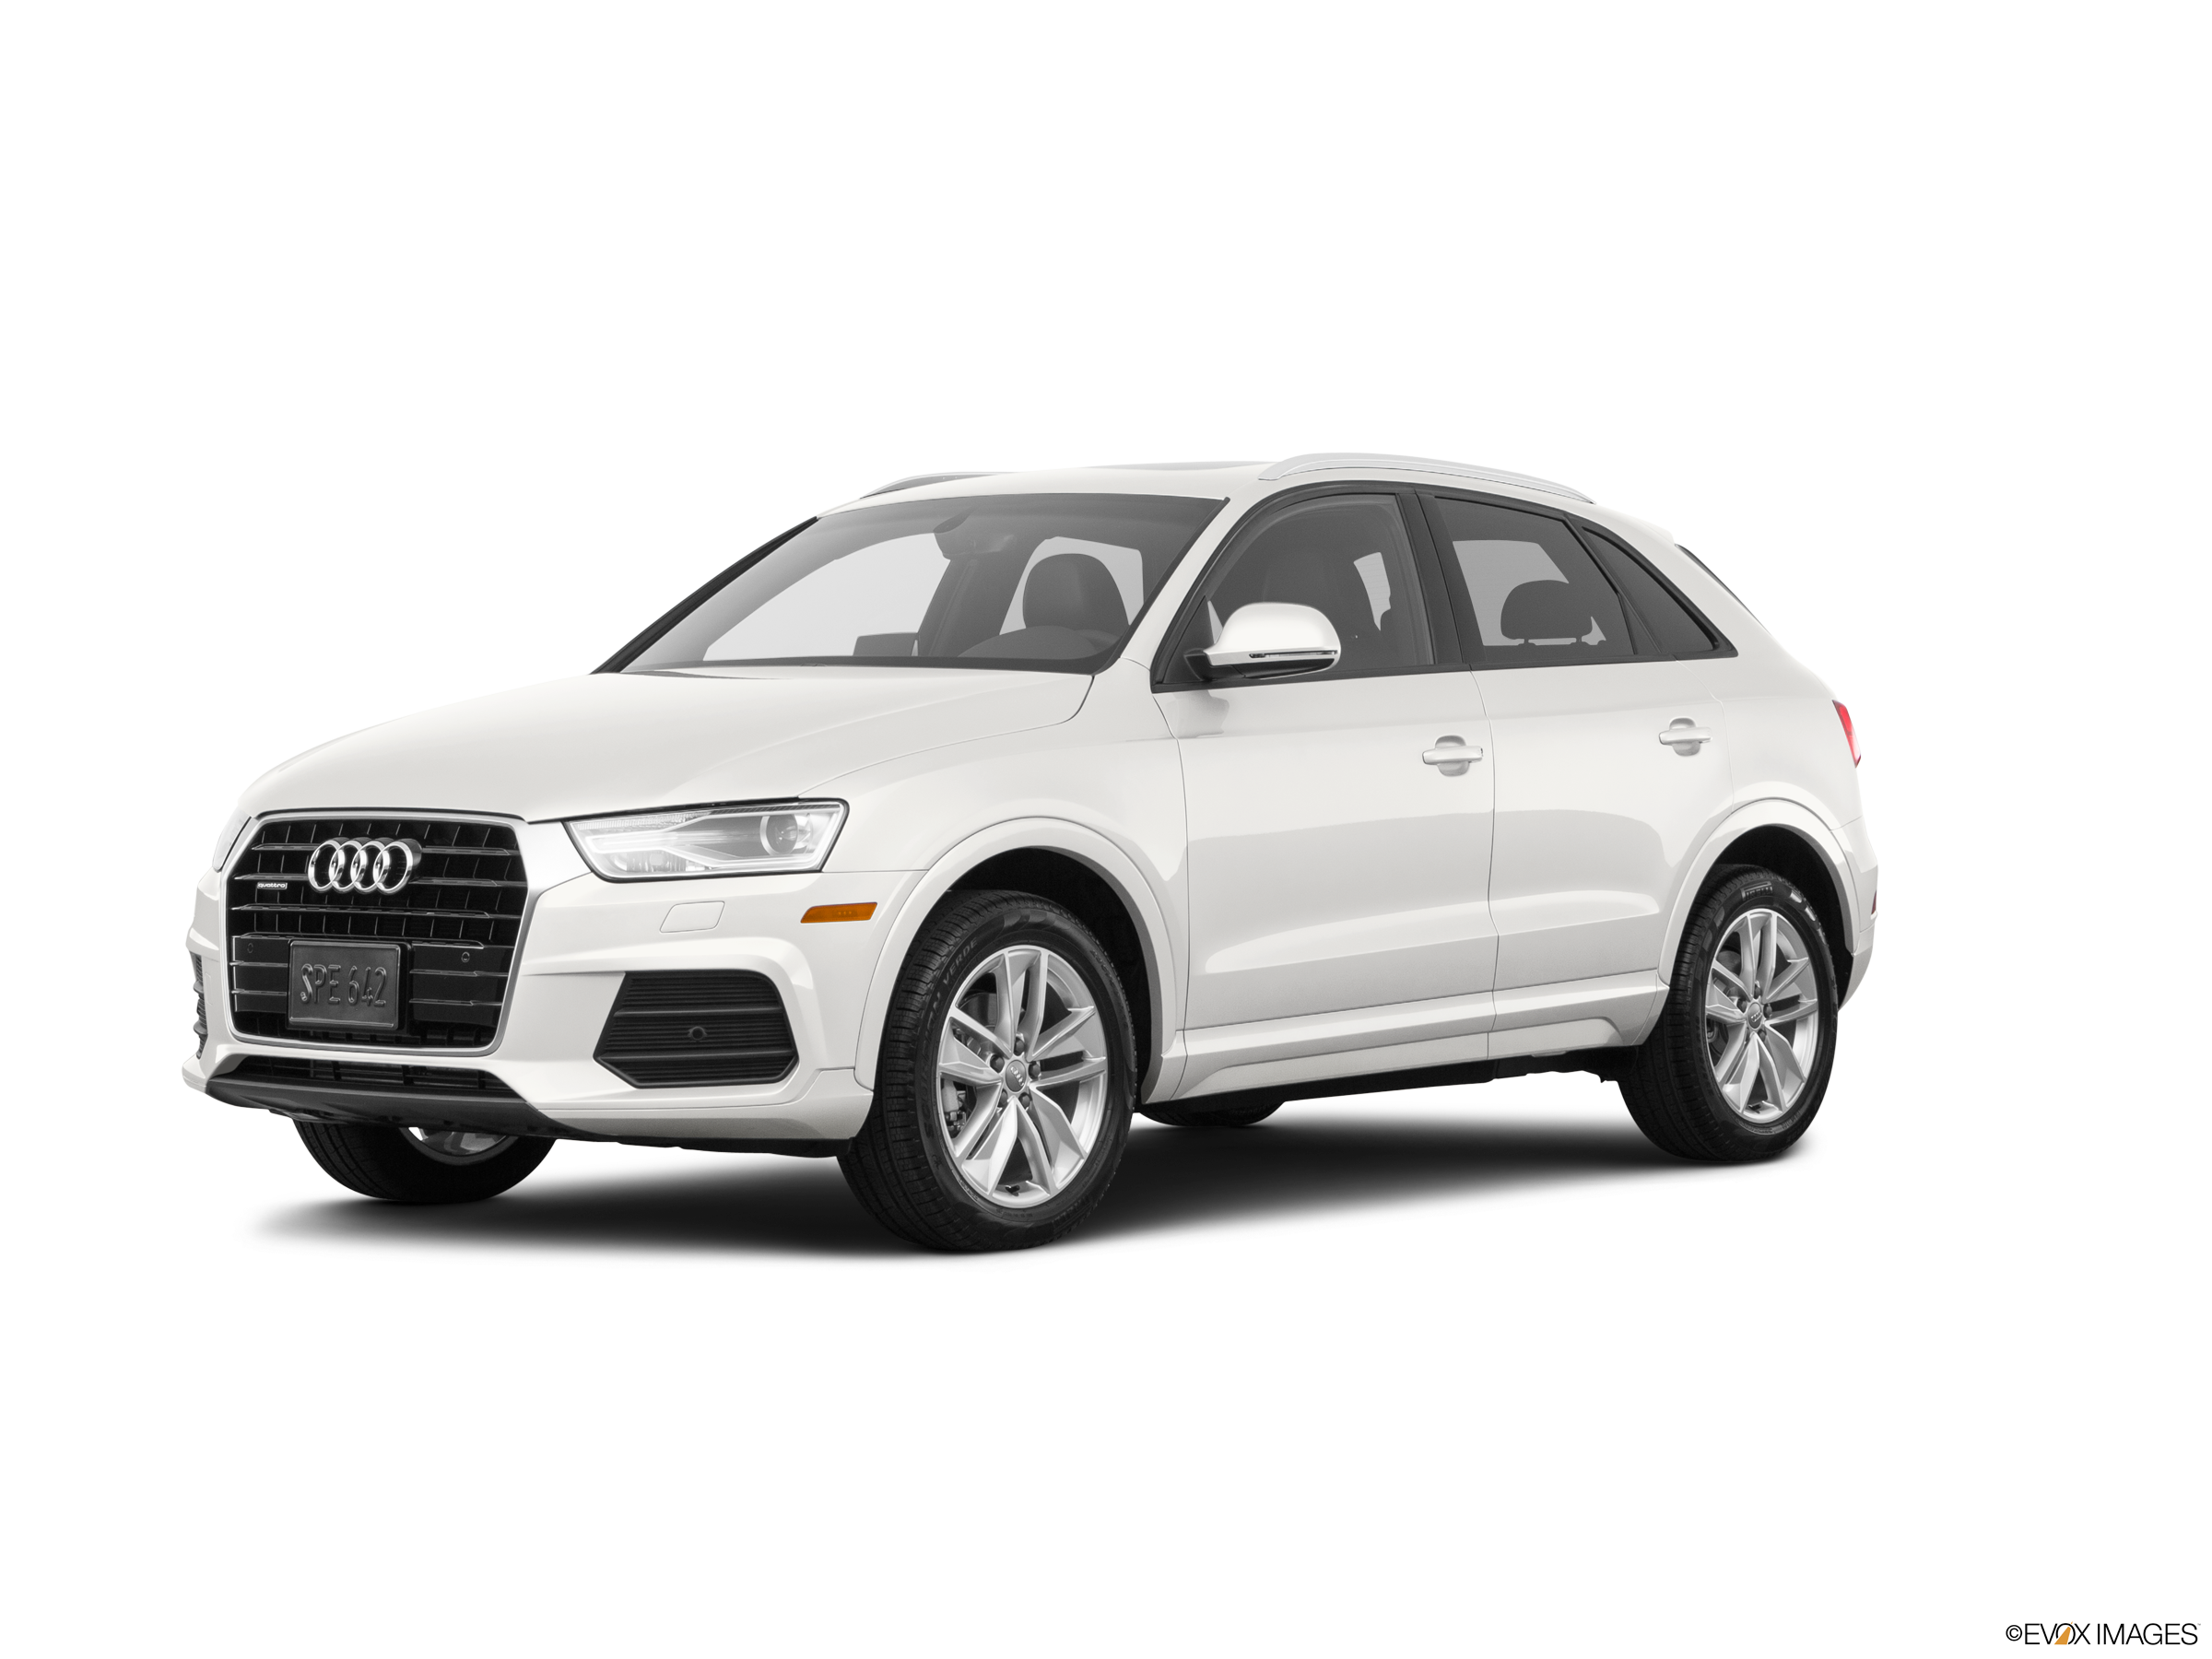 2017 Audi Q3 Prices, Reviews, and Photos - MotorTrend